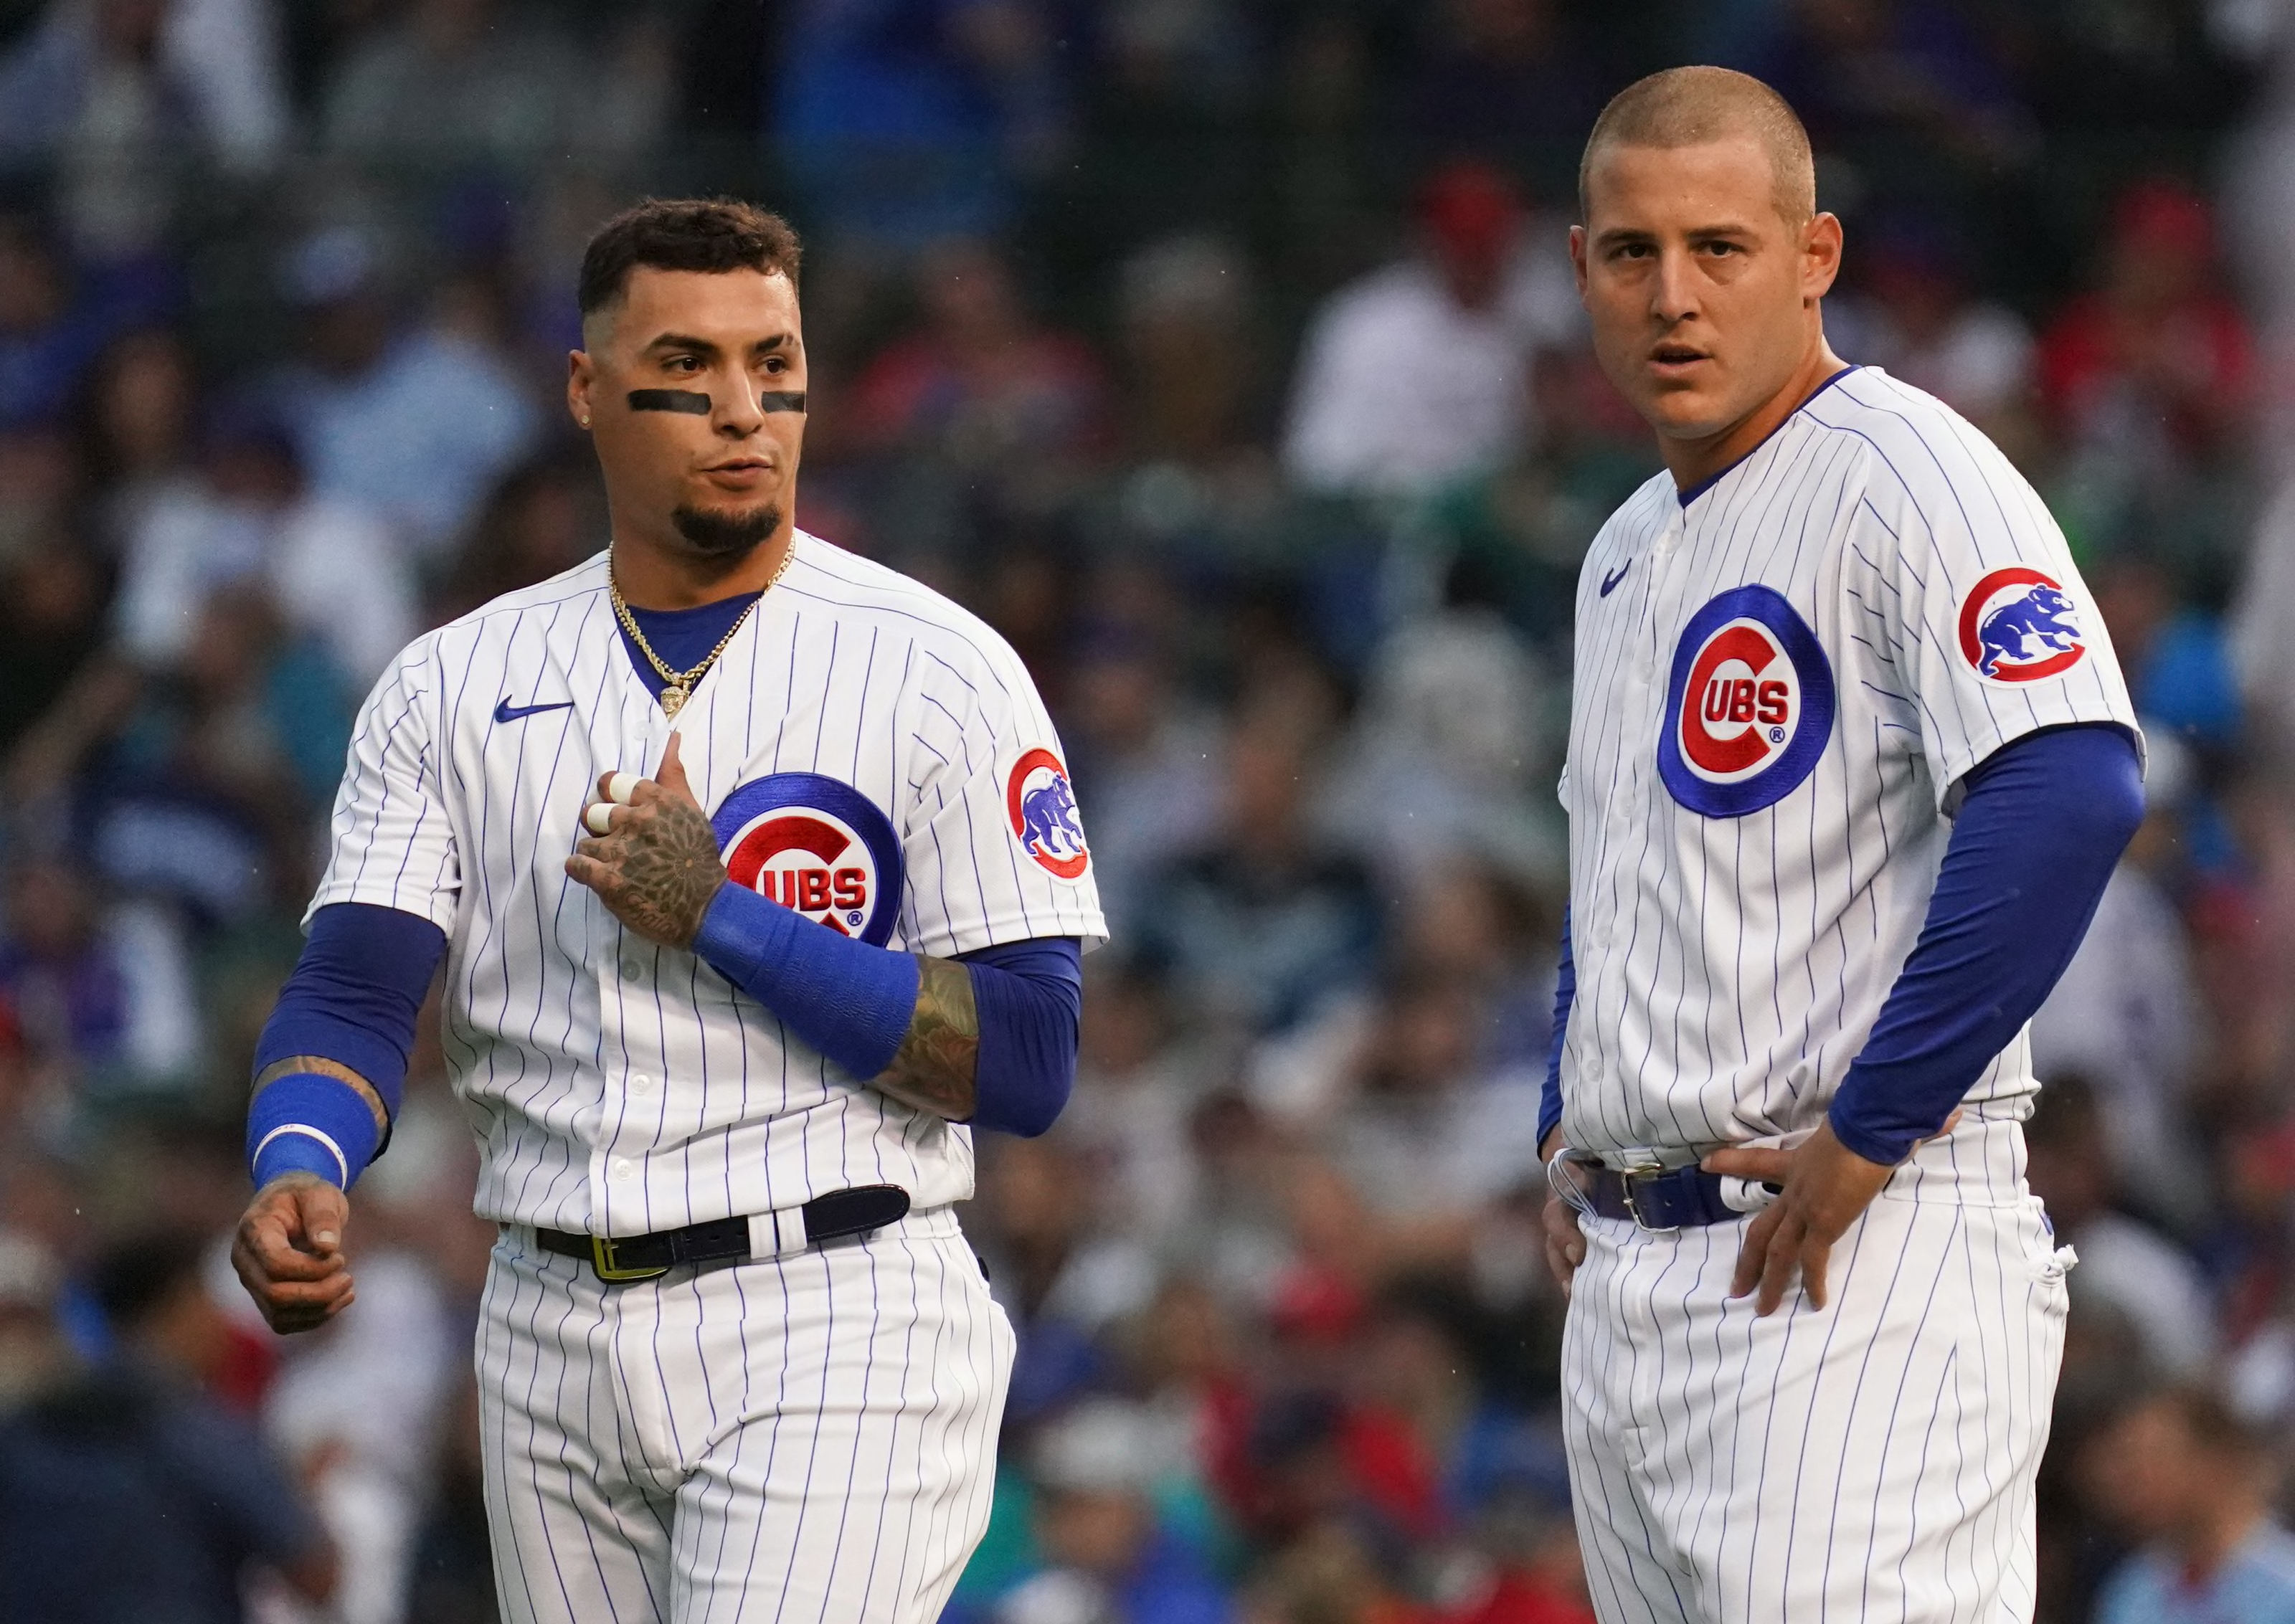 Chicago Cubs: 3 trades with Oakland Athletics to blow it up